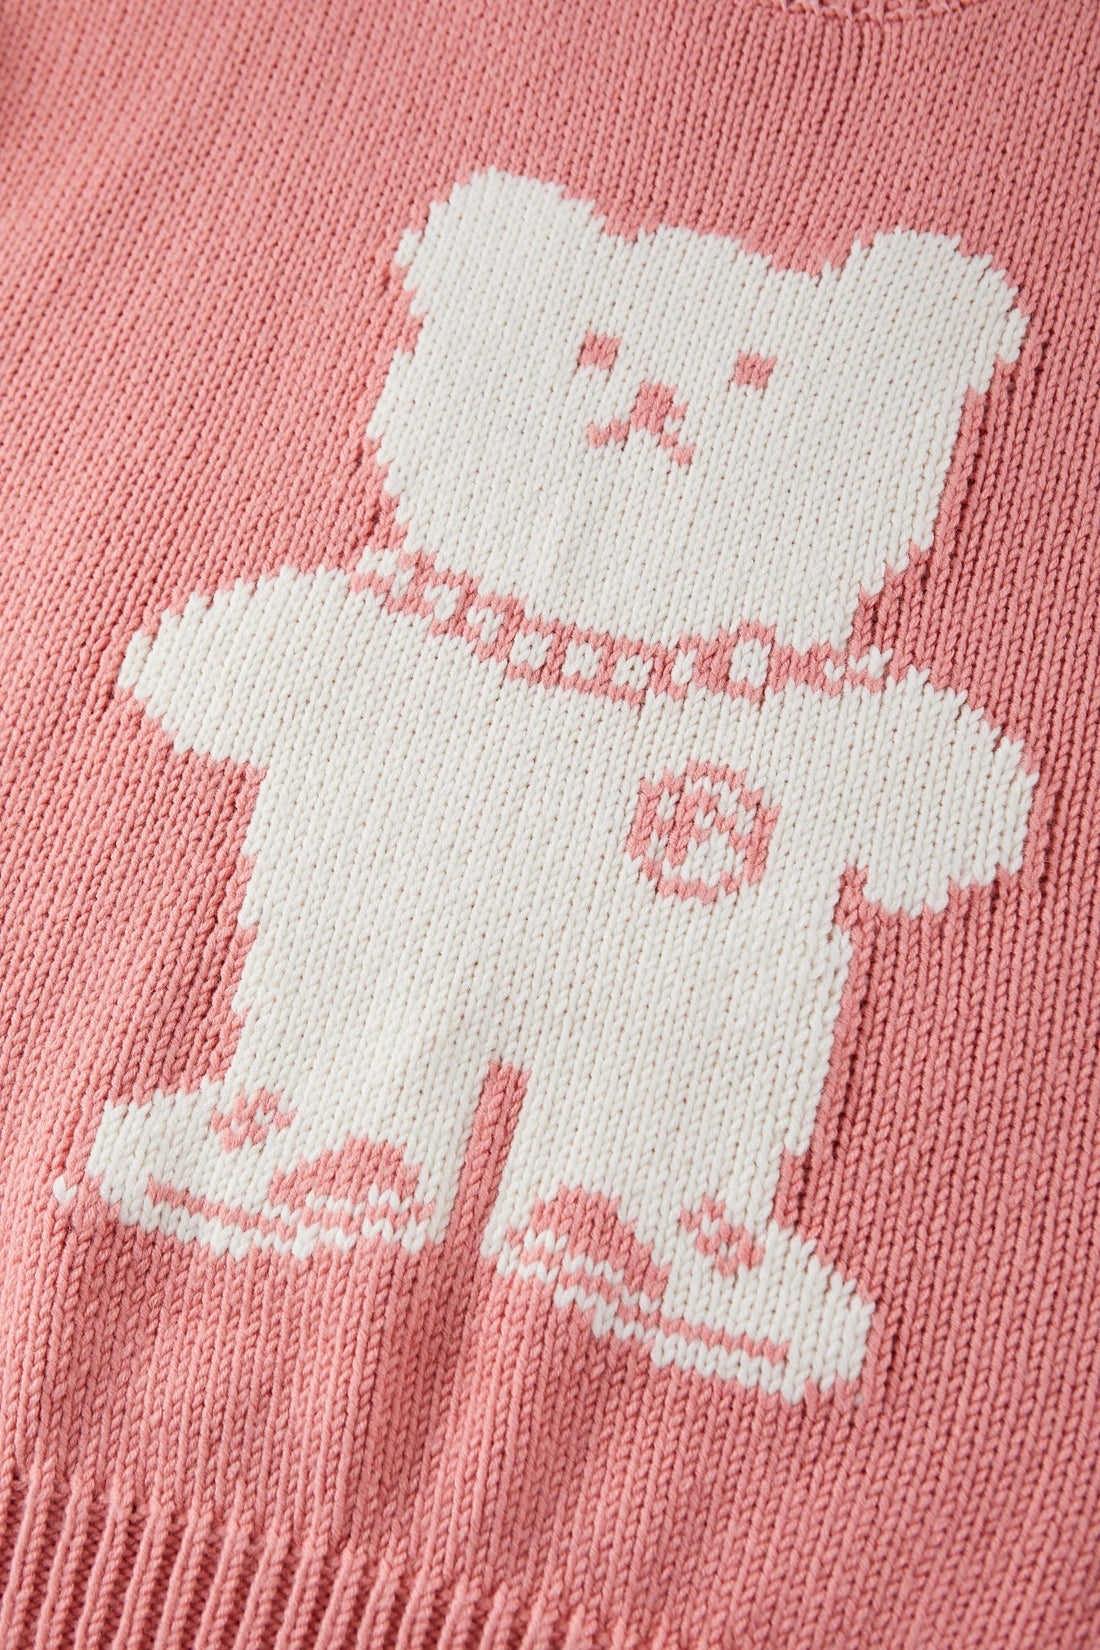 SKETCHY BEAR SWEATER PINK Acupuncture